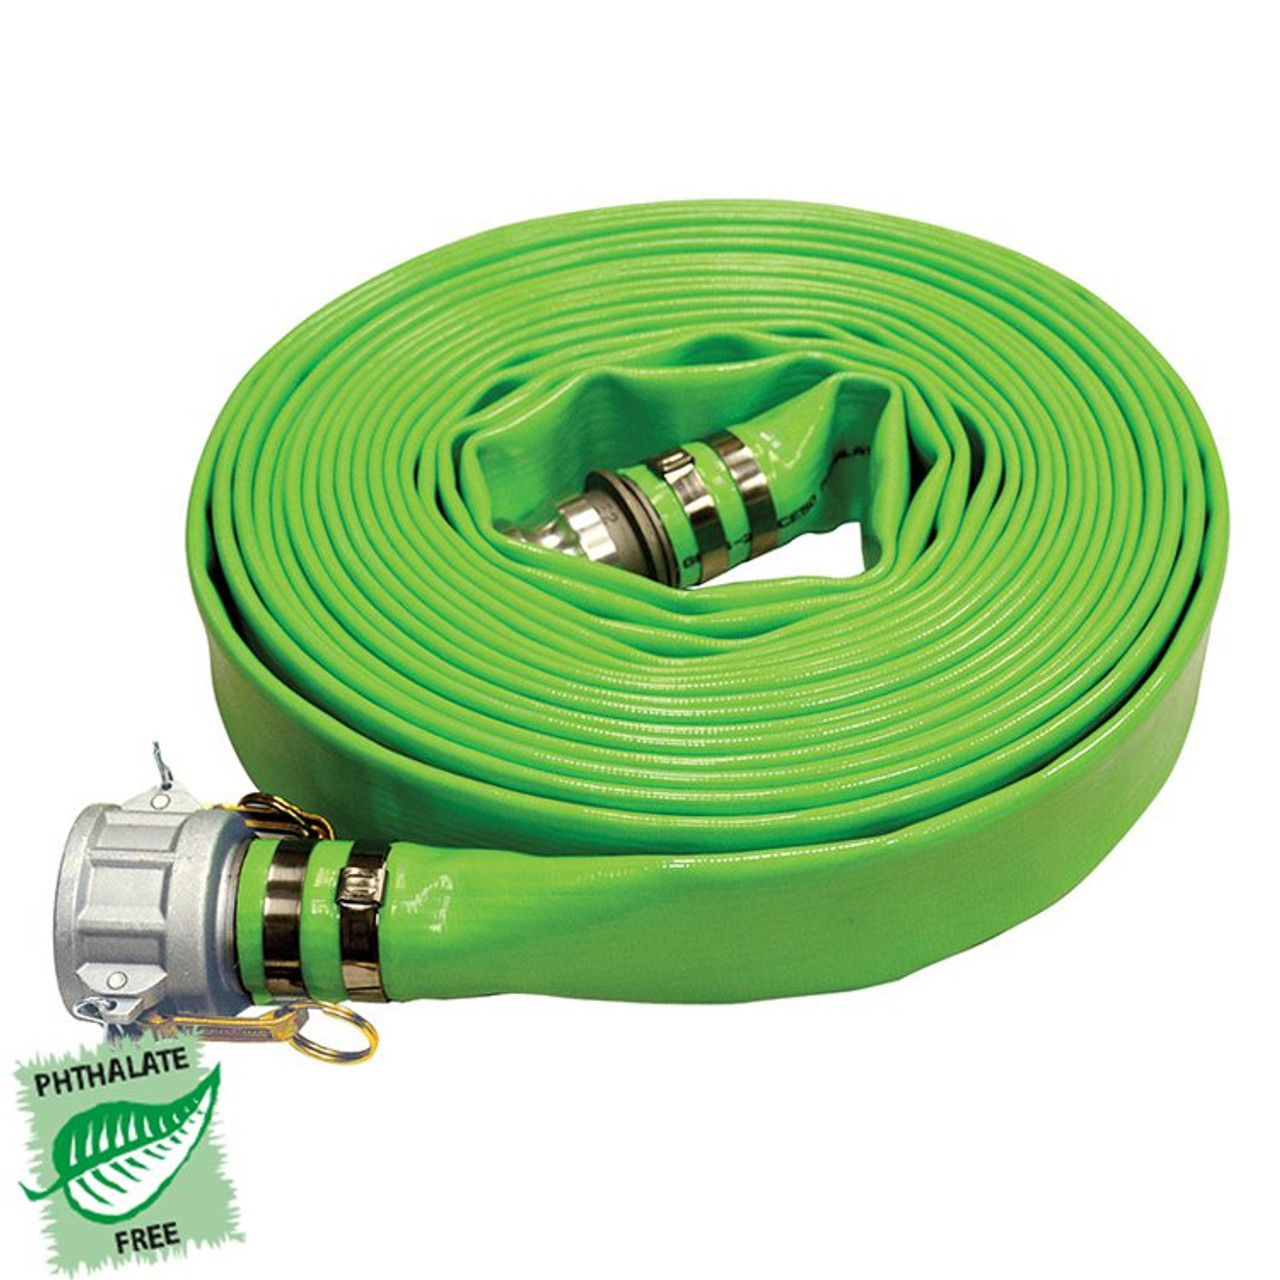 3" x 50' Phthalate Free Green Lay-Flat Discharge Hose Assembly   G975-300CE50